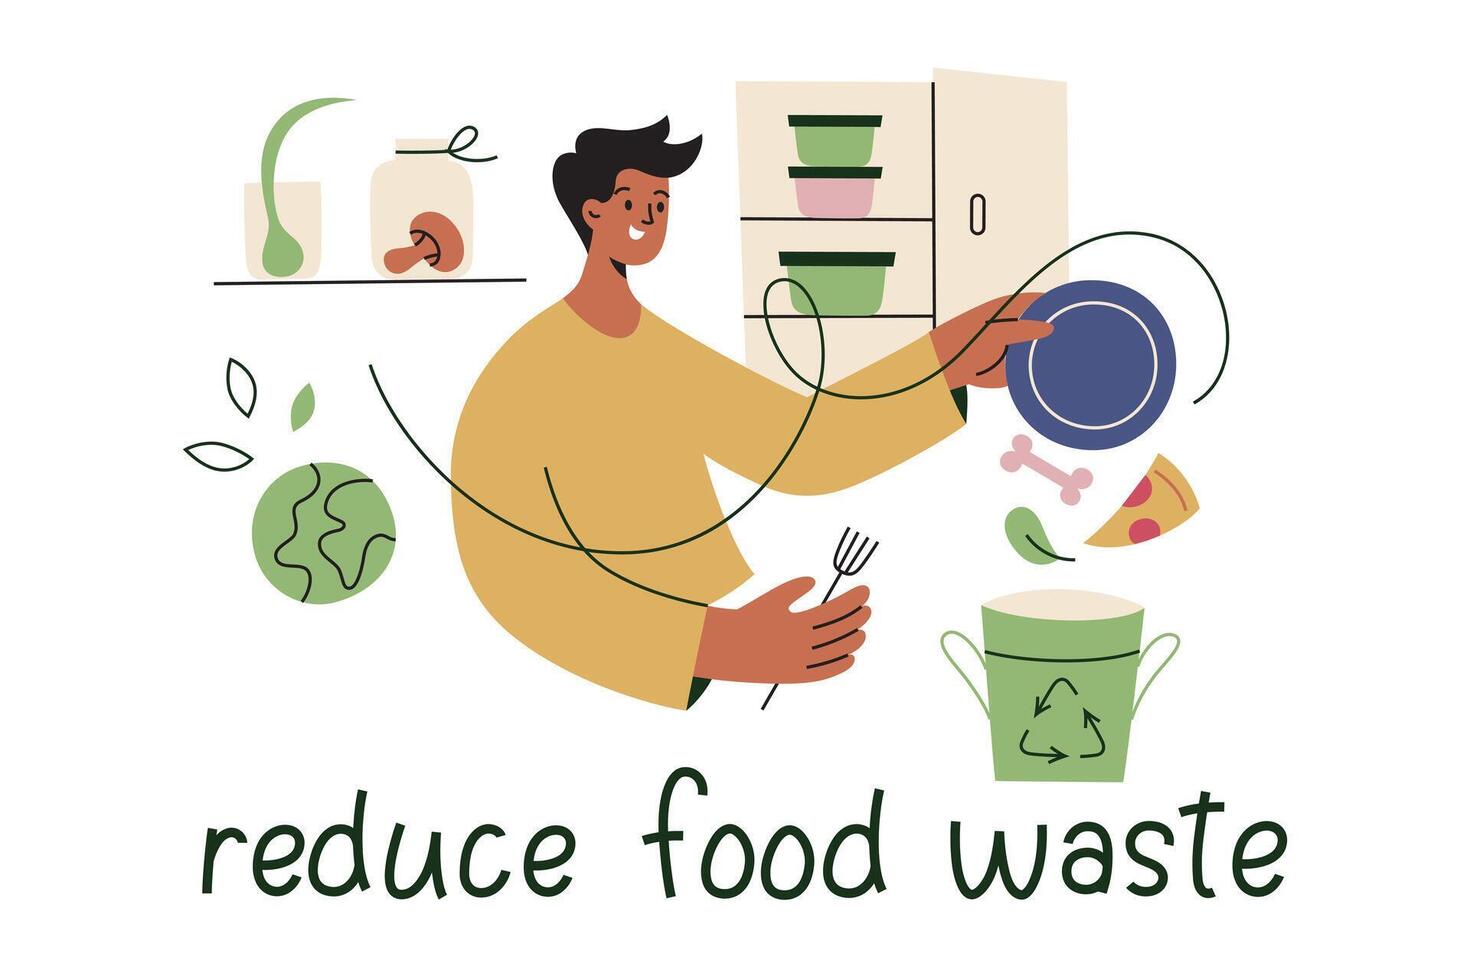 Reduce food waste poster, man throwing leftovers in compost bin, illustration of flat character, planet earth icon, reuse garbage, sustainable eating composition, ecology awareness vector